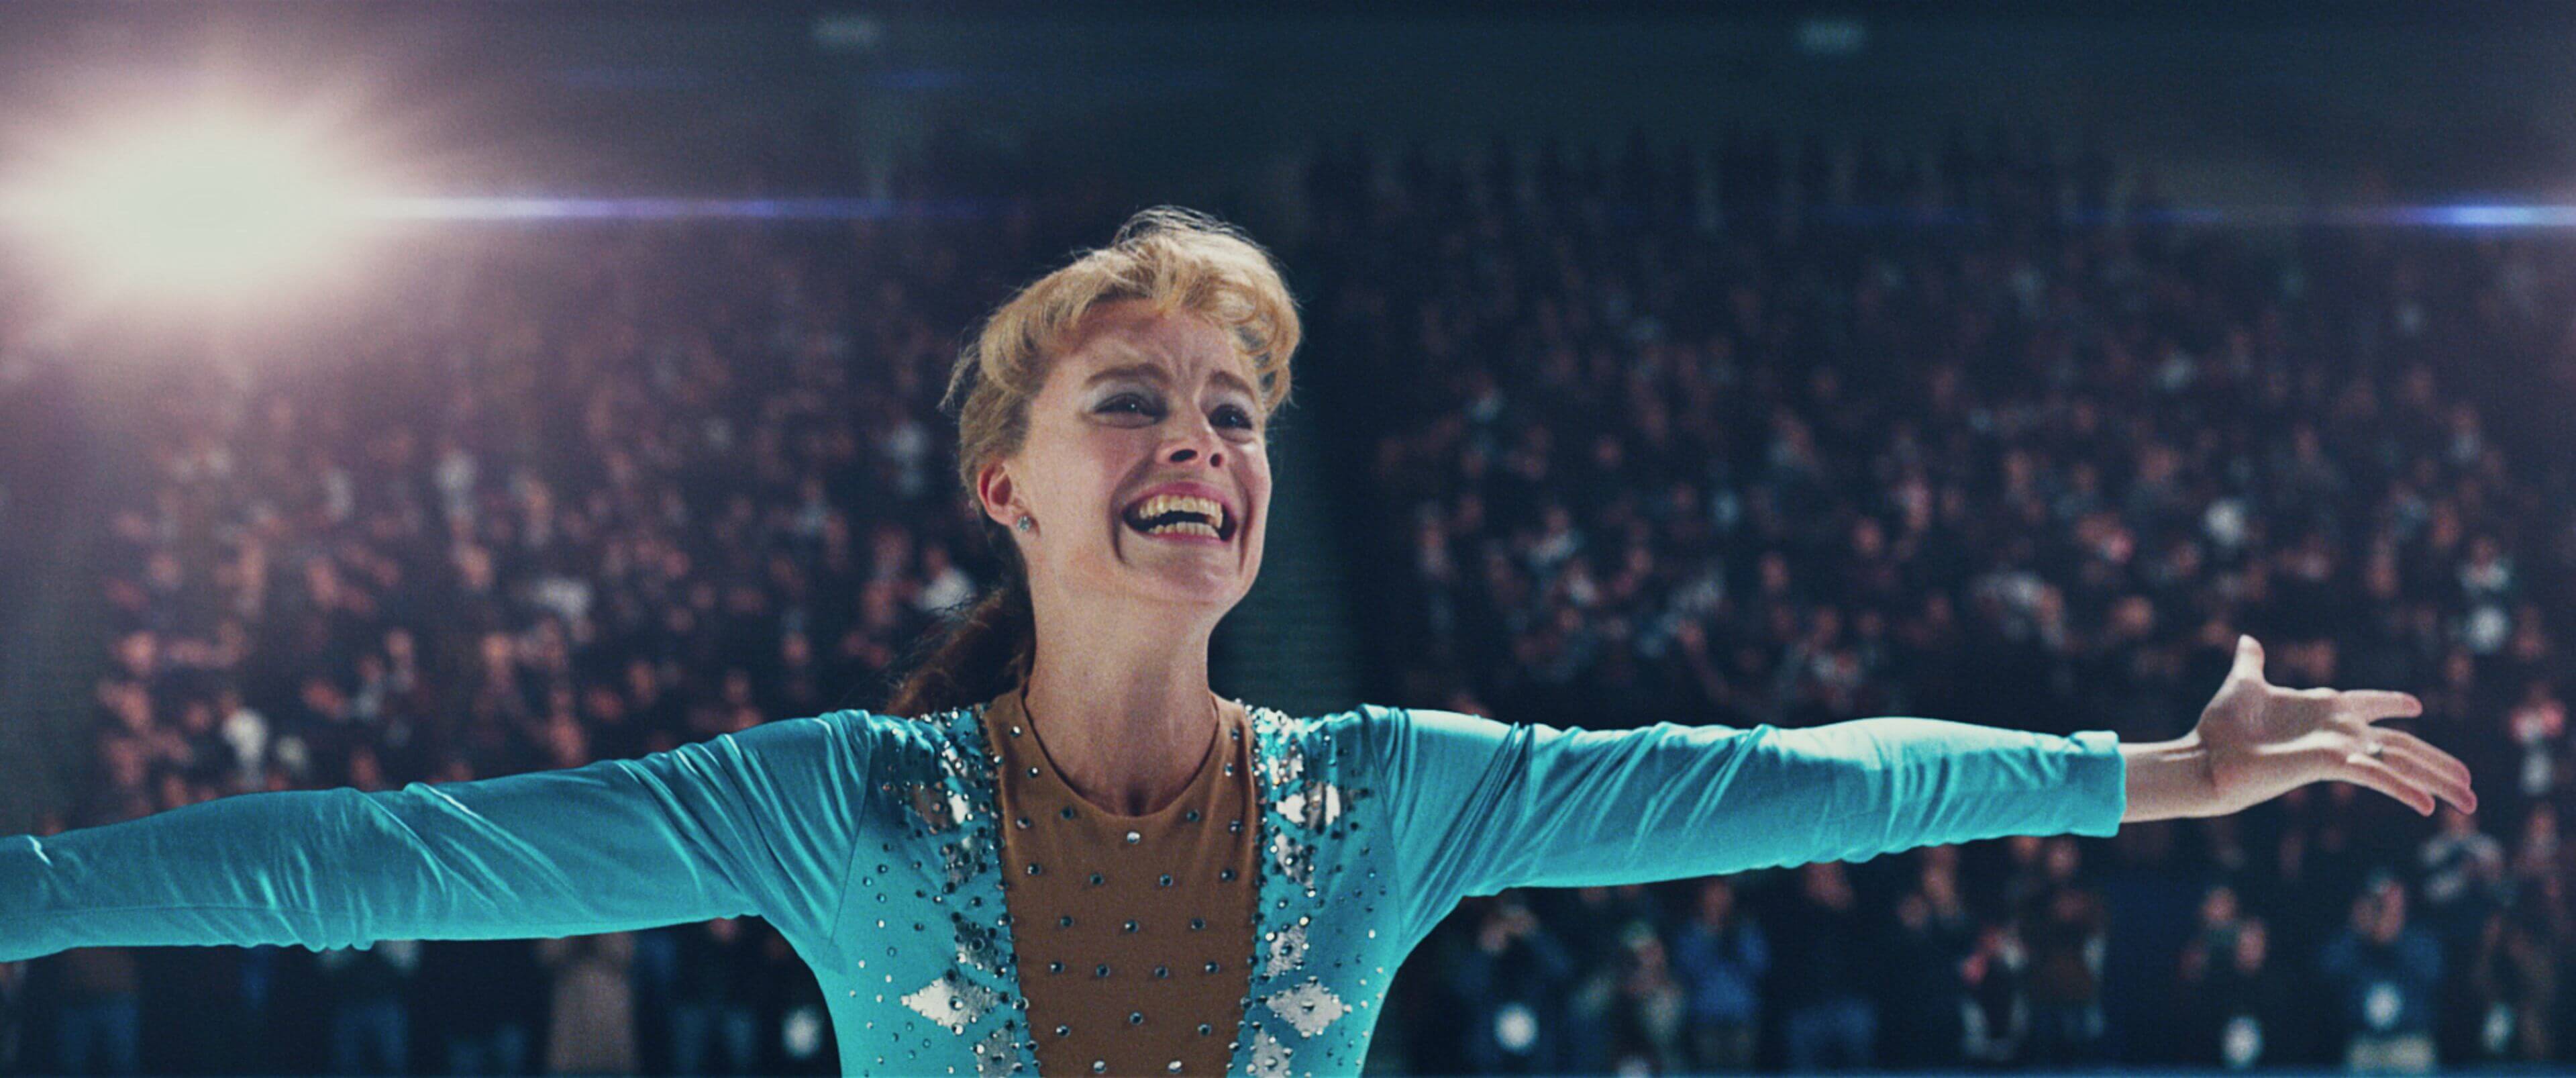 'I, Tonya' Review: The Film That Finally Convinces Of Margot Robbie’s Acting Ability